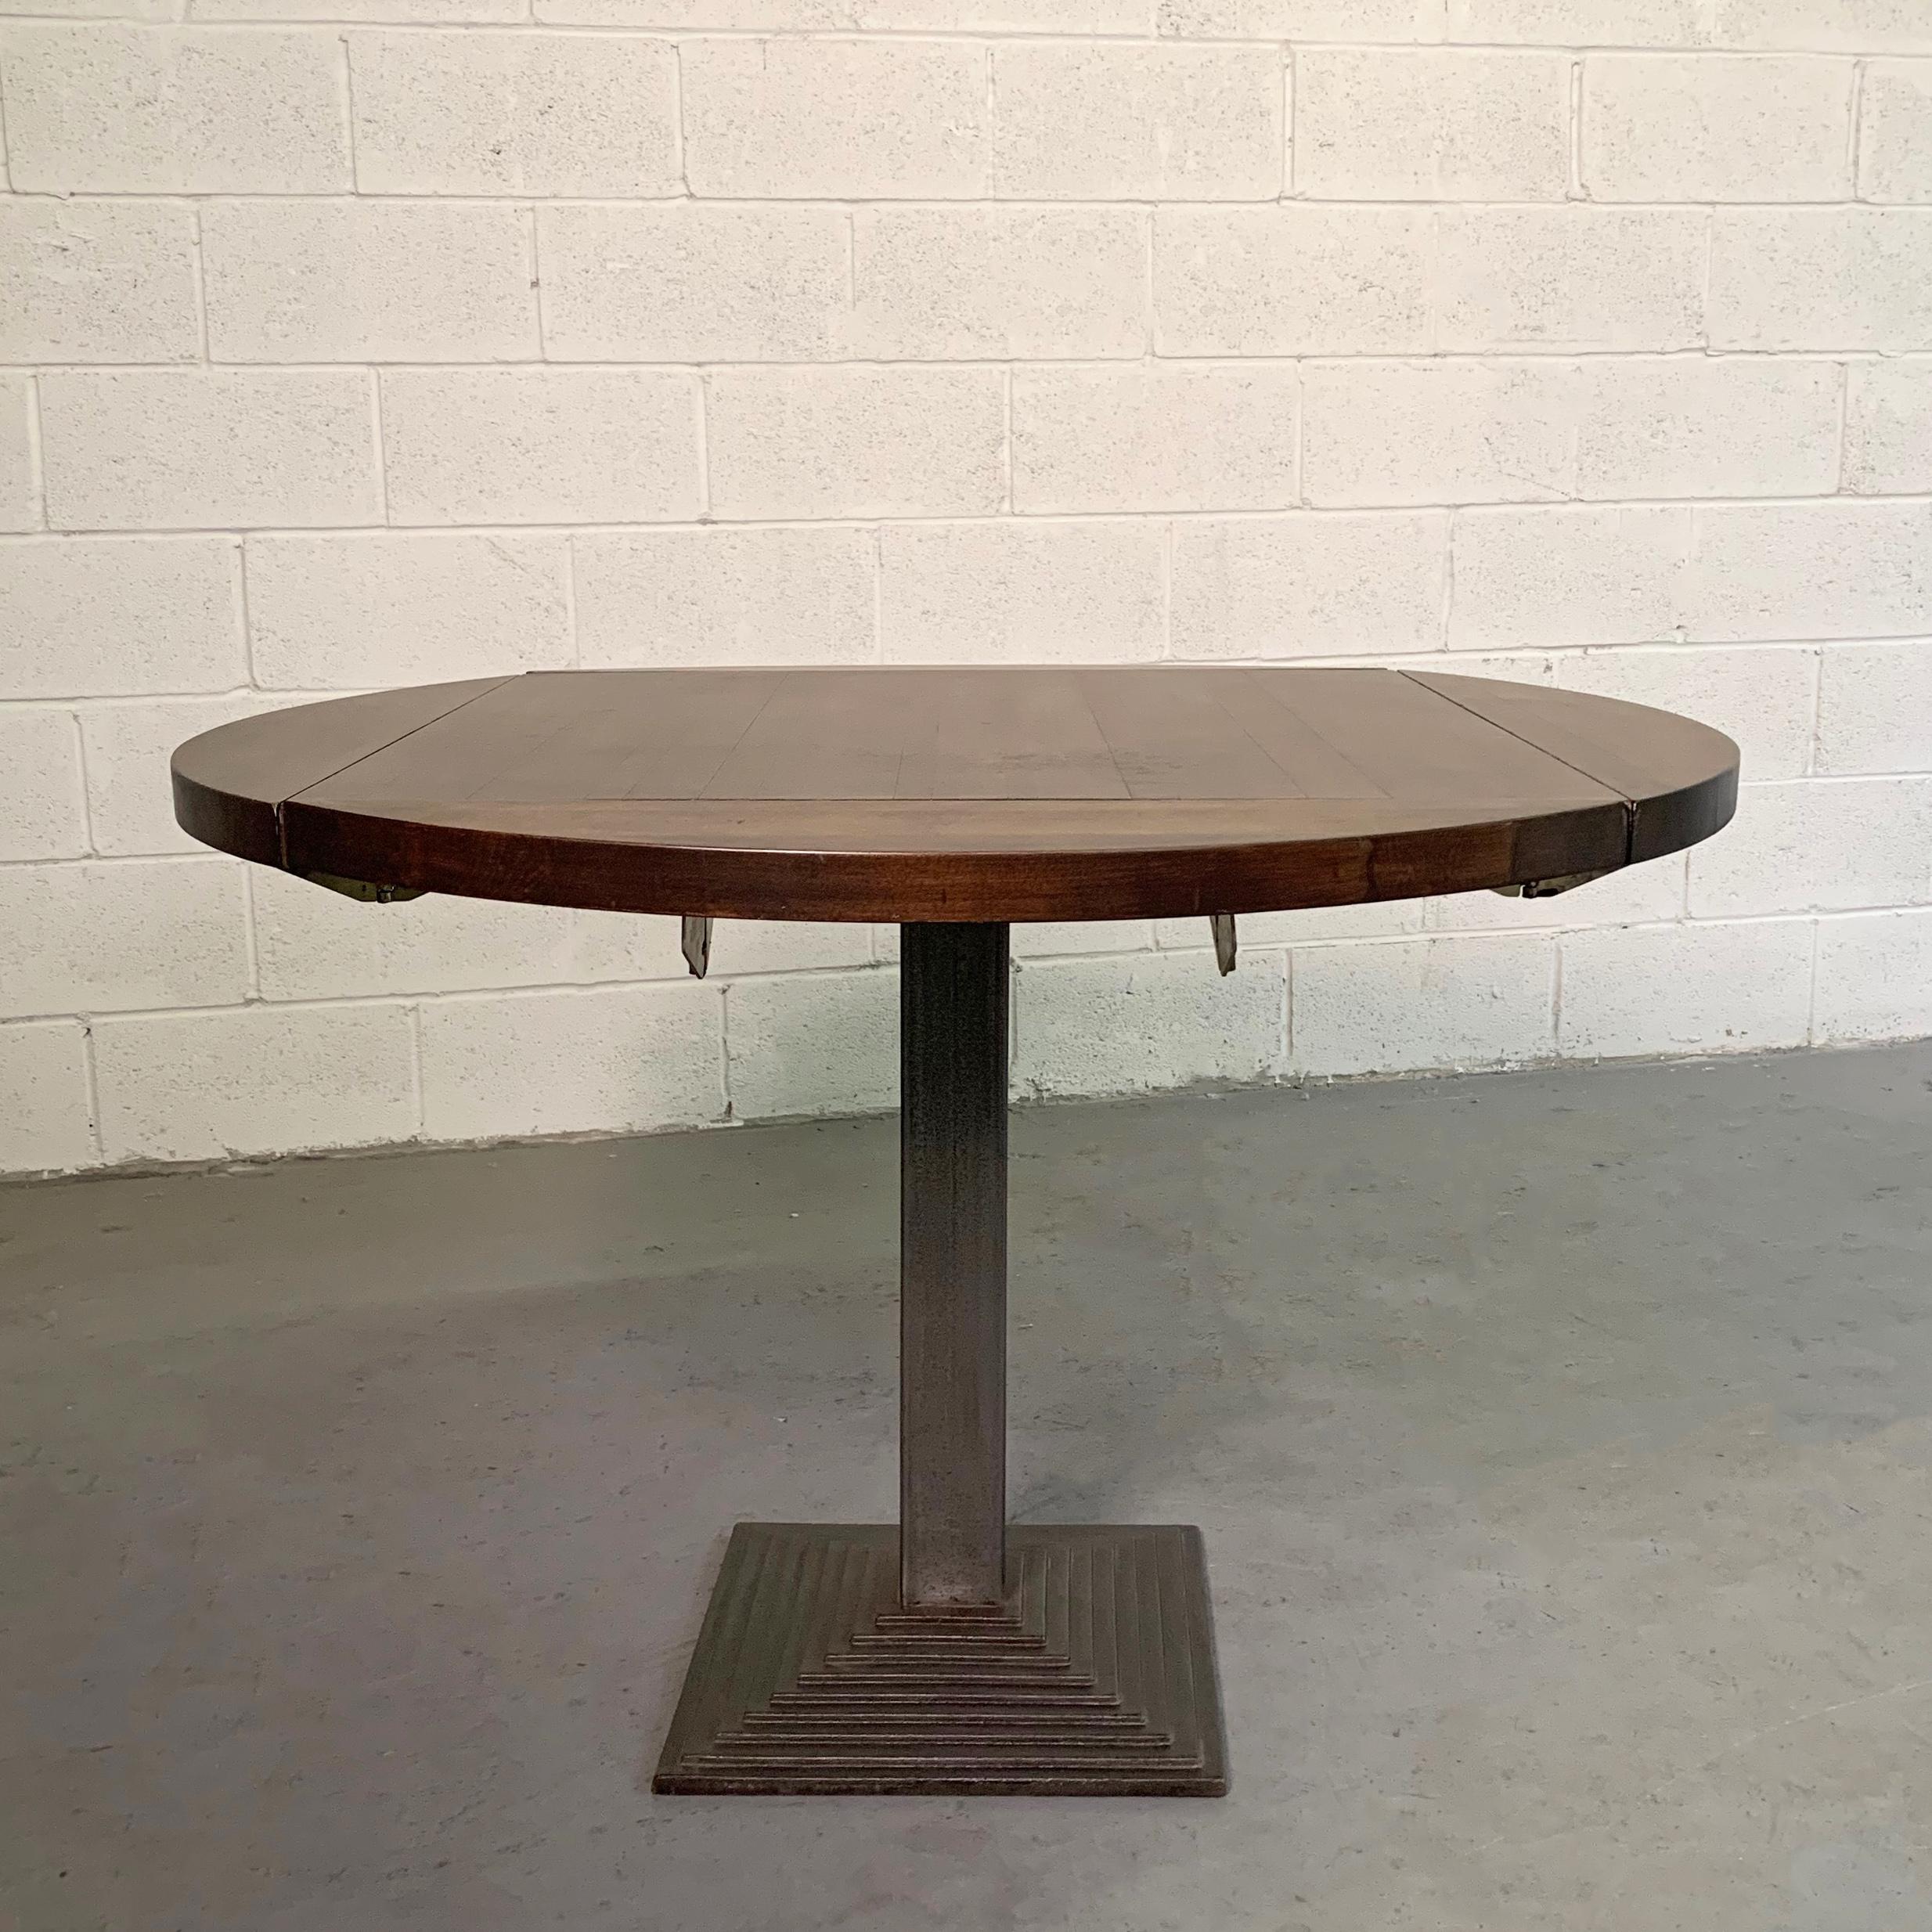 Custom, industrial, round, oak dining table with cast iron pedestal base folds on four sides to a smaller 30 inch square table.